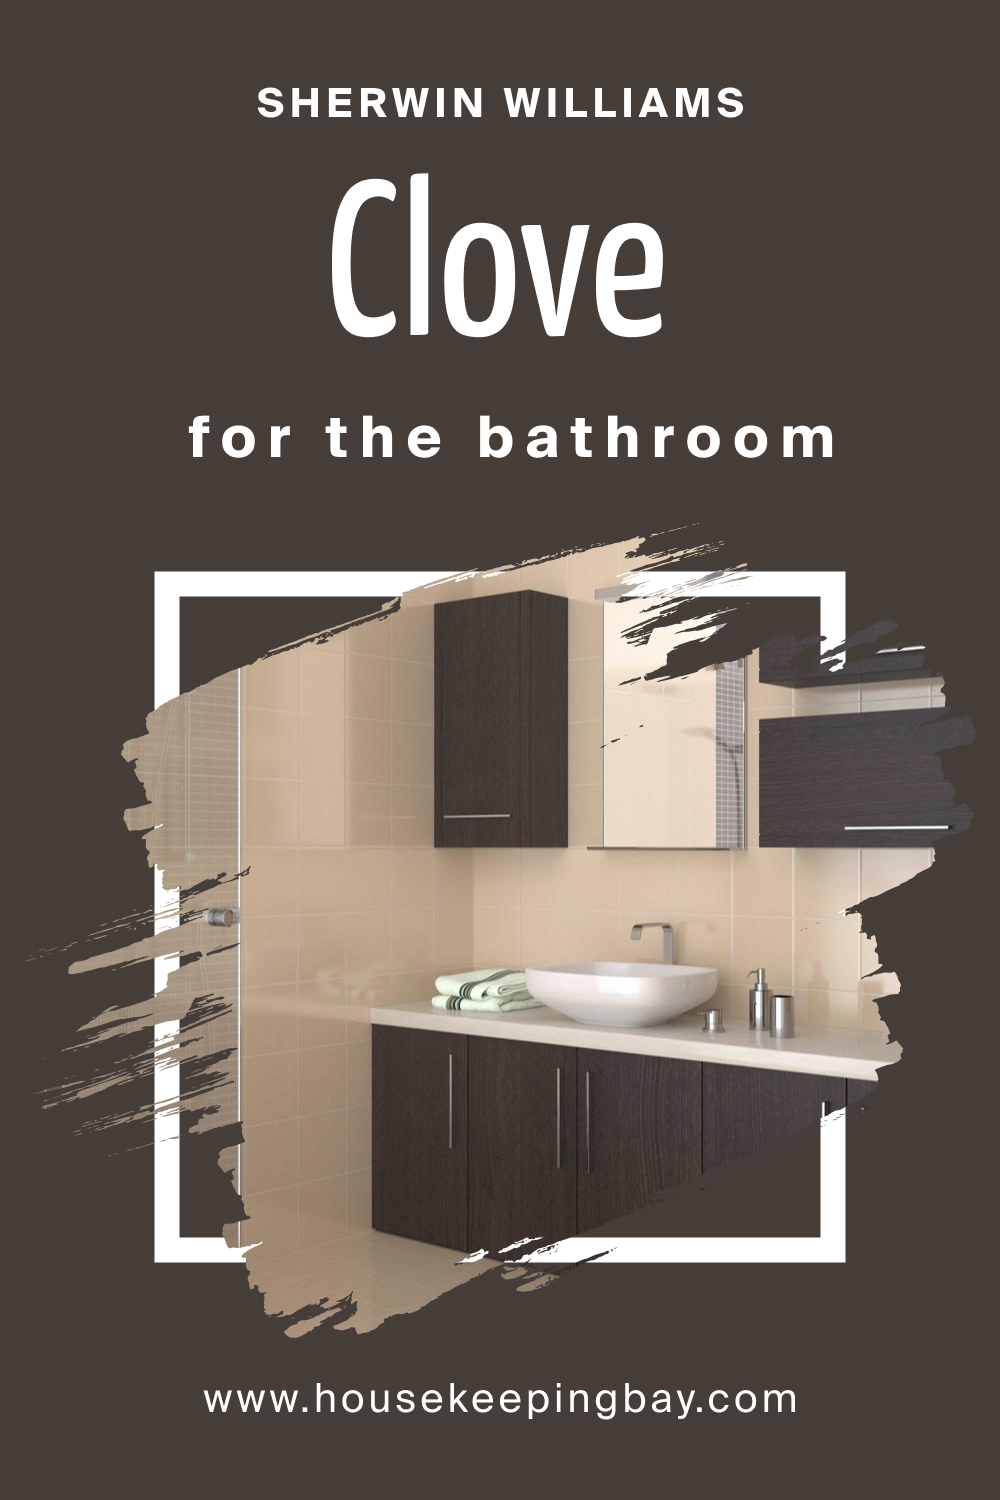 Sherwin Williams. SW 9605 Clove For the Bathroom